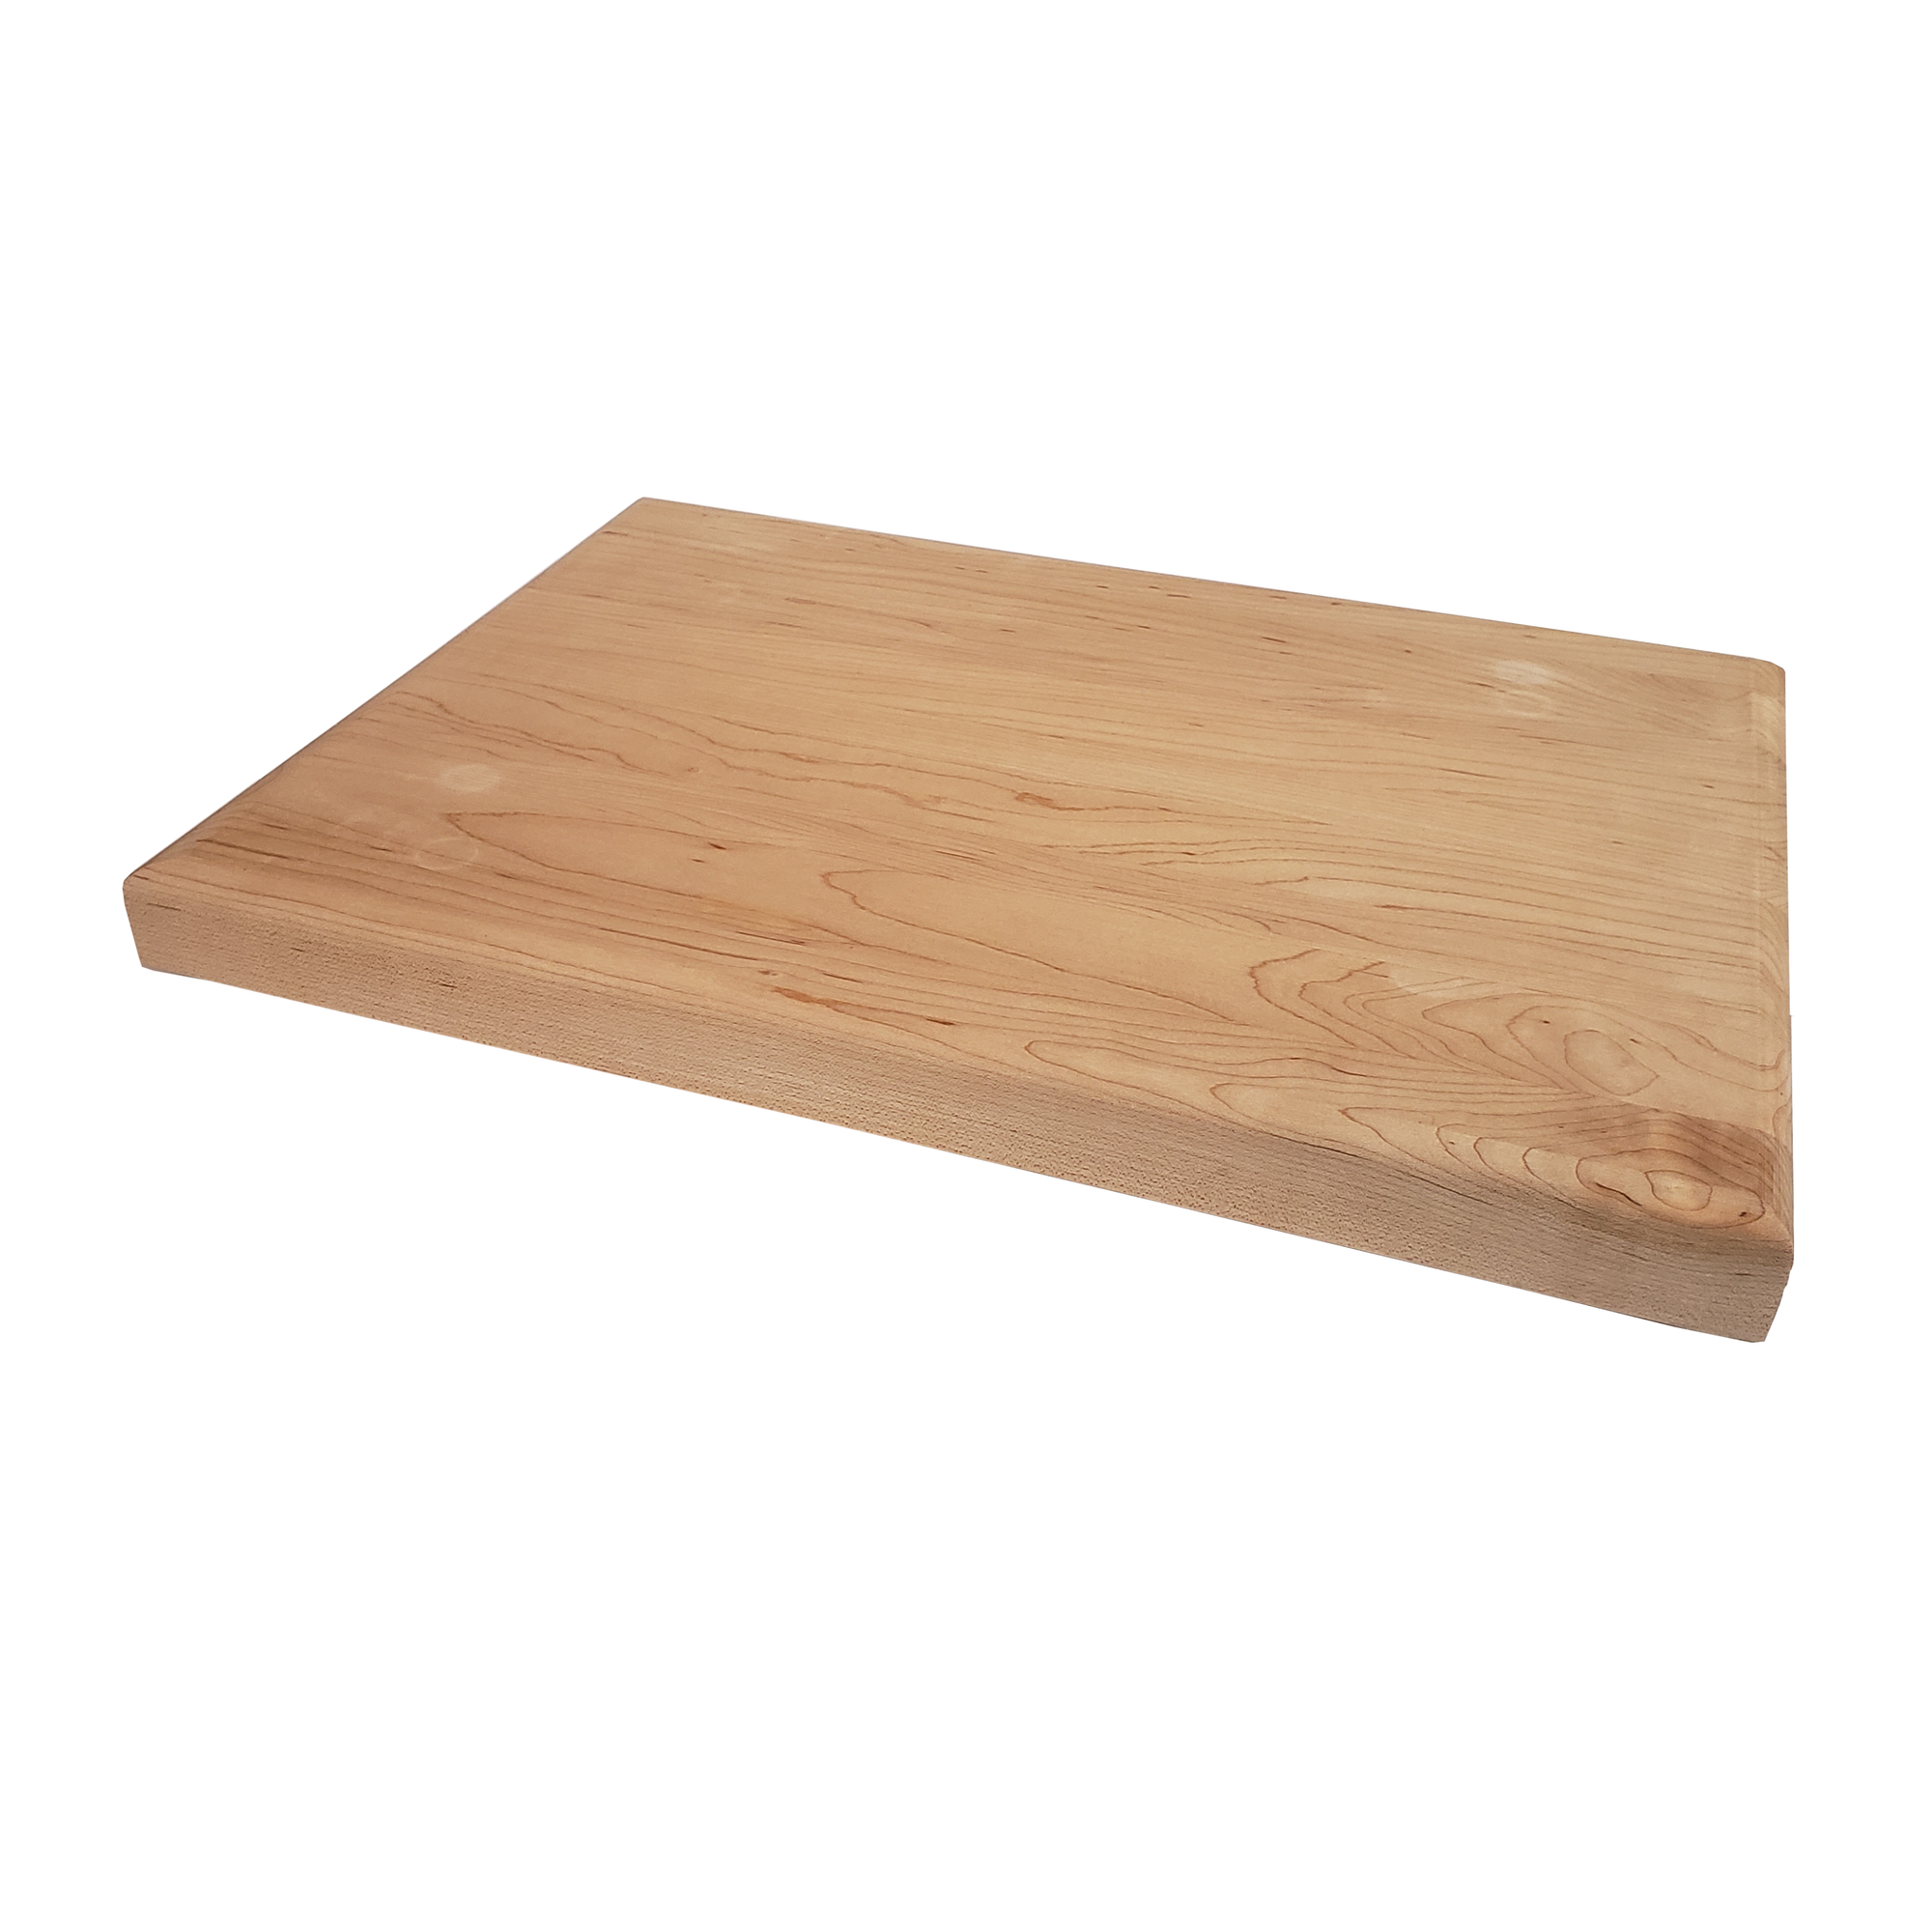 Youth Opportunities Unlimited Maple Cutting Board - Medium